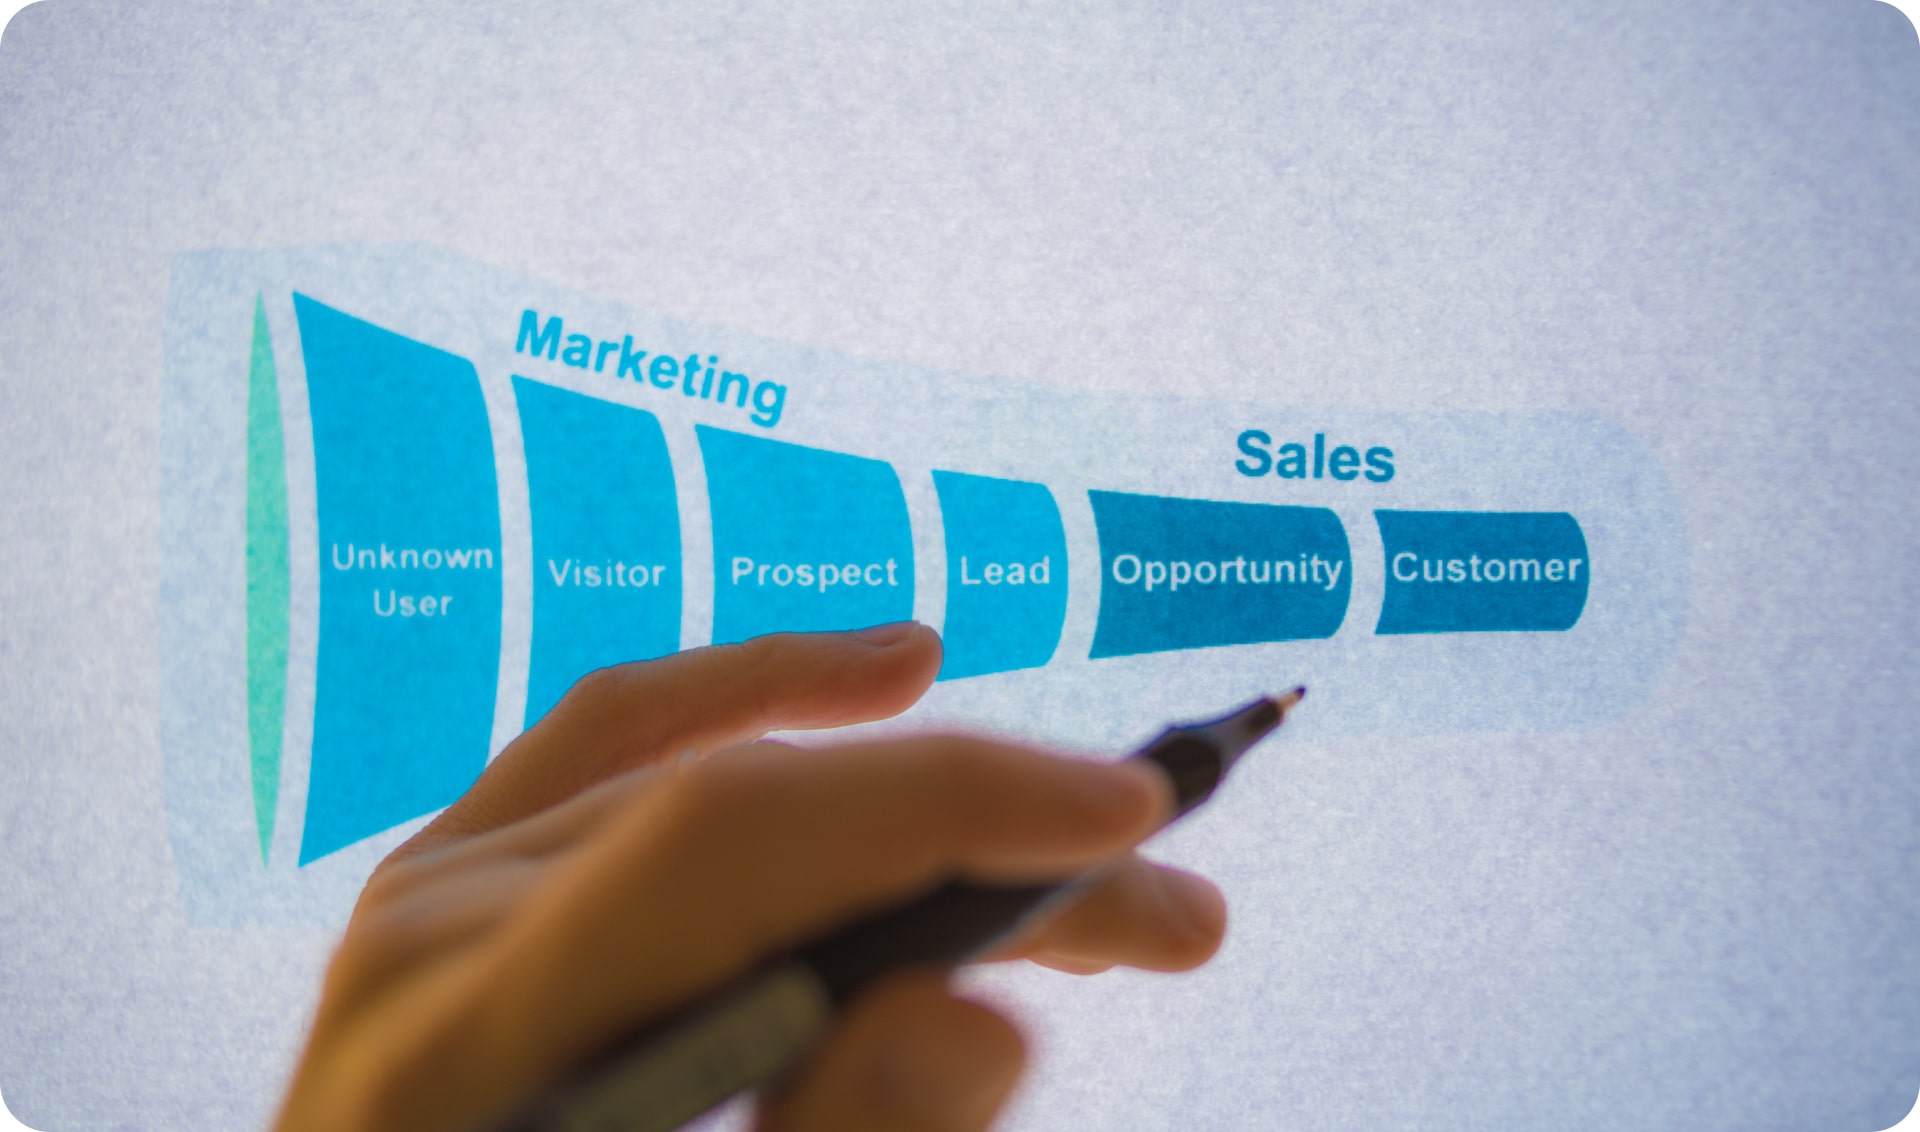 Sales funnel: from visitor to customer. The graph shows the stages of turning a potential customer into a loyal one.